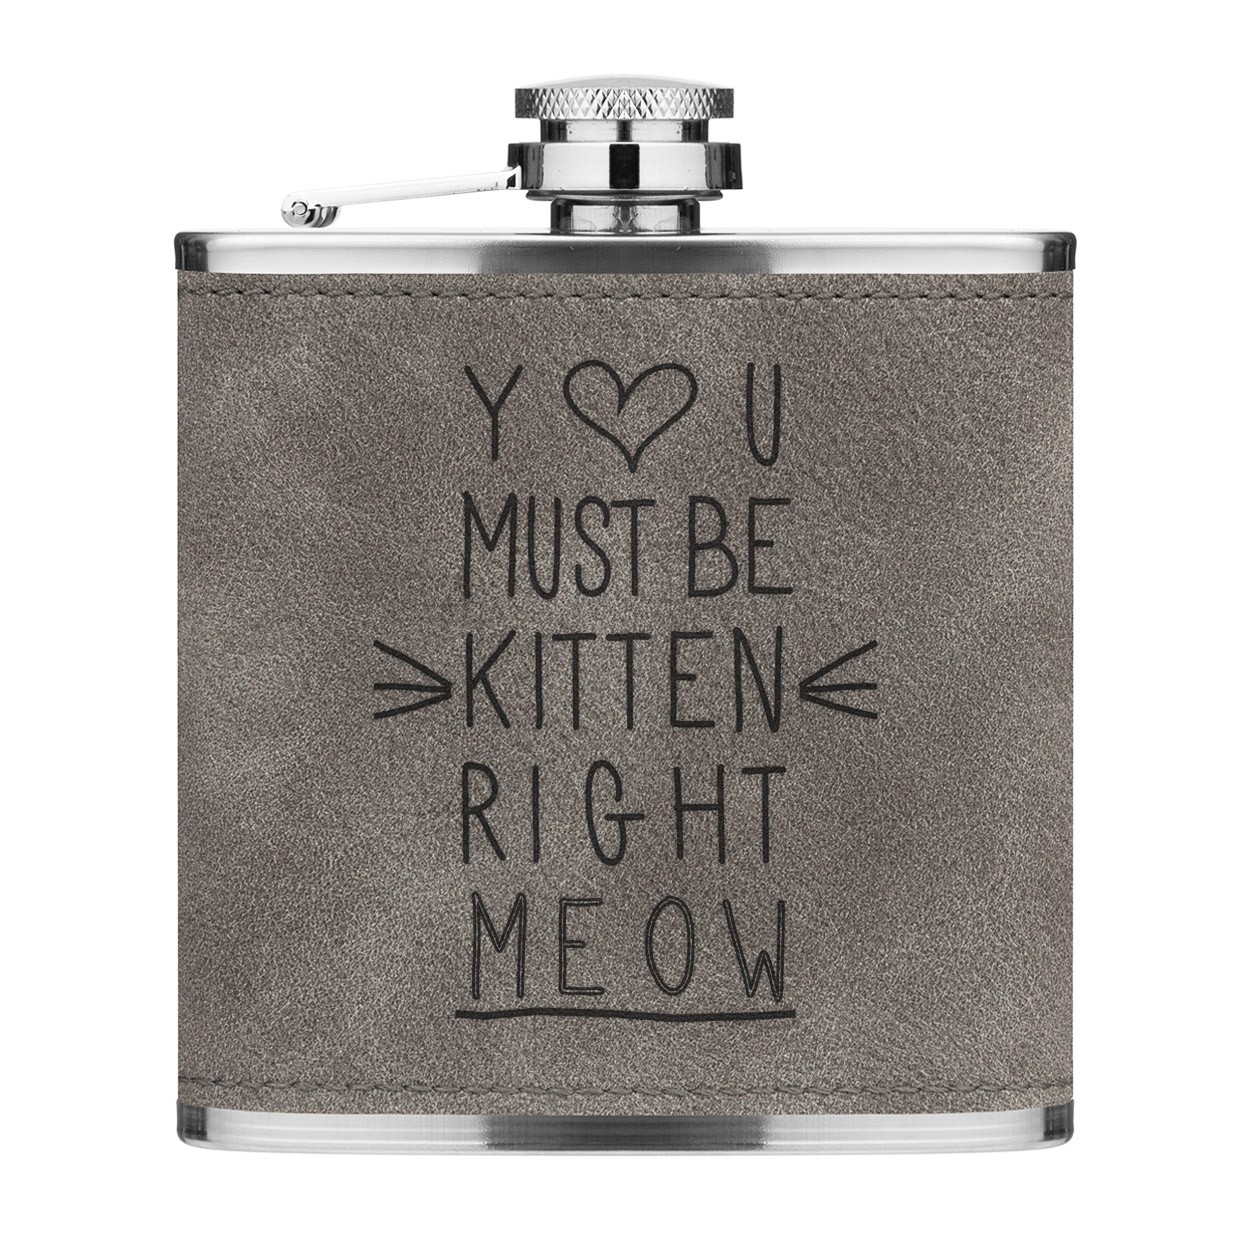 You Must Be Kitten Right Meow 6oz PU Leather Hip Flask Grey Luxe